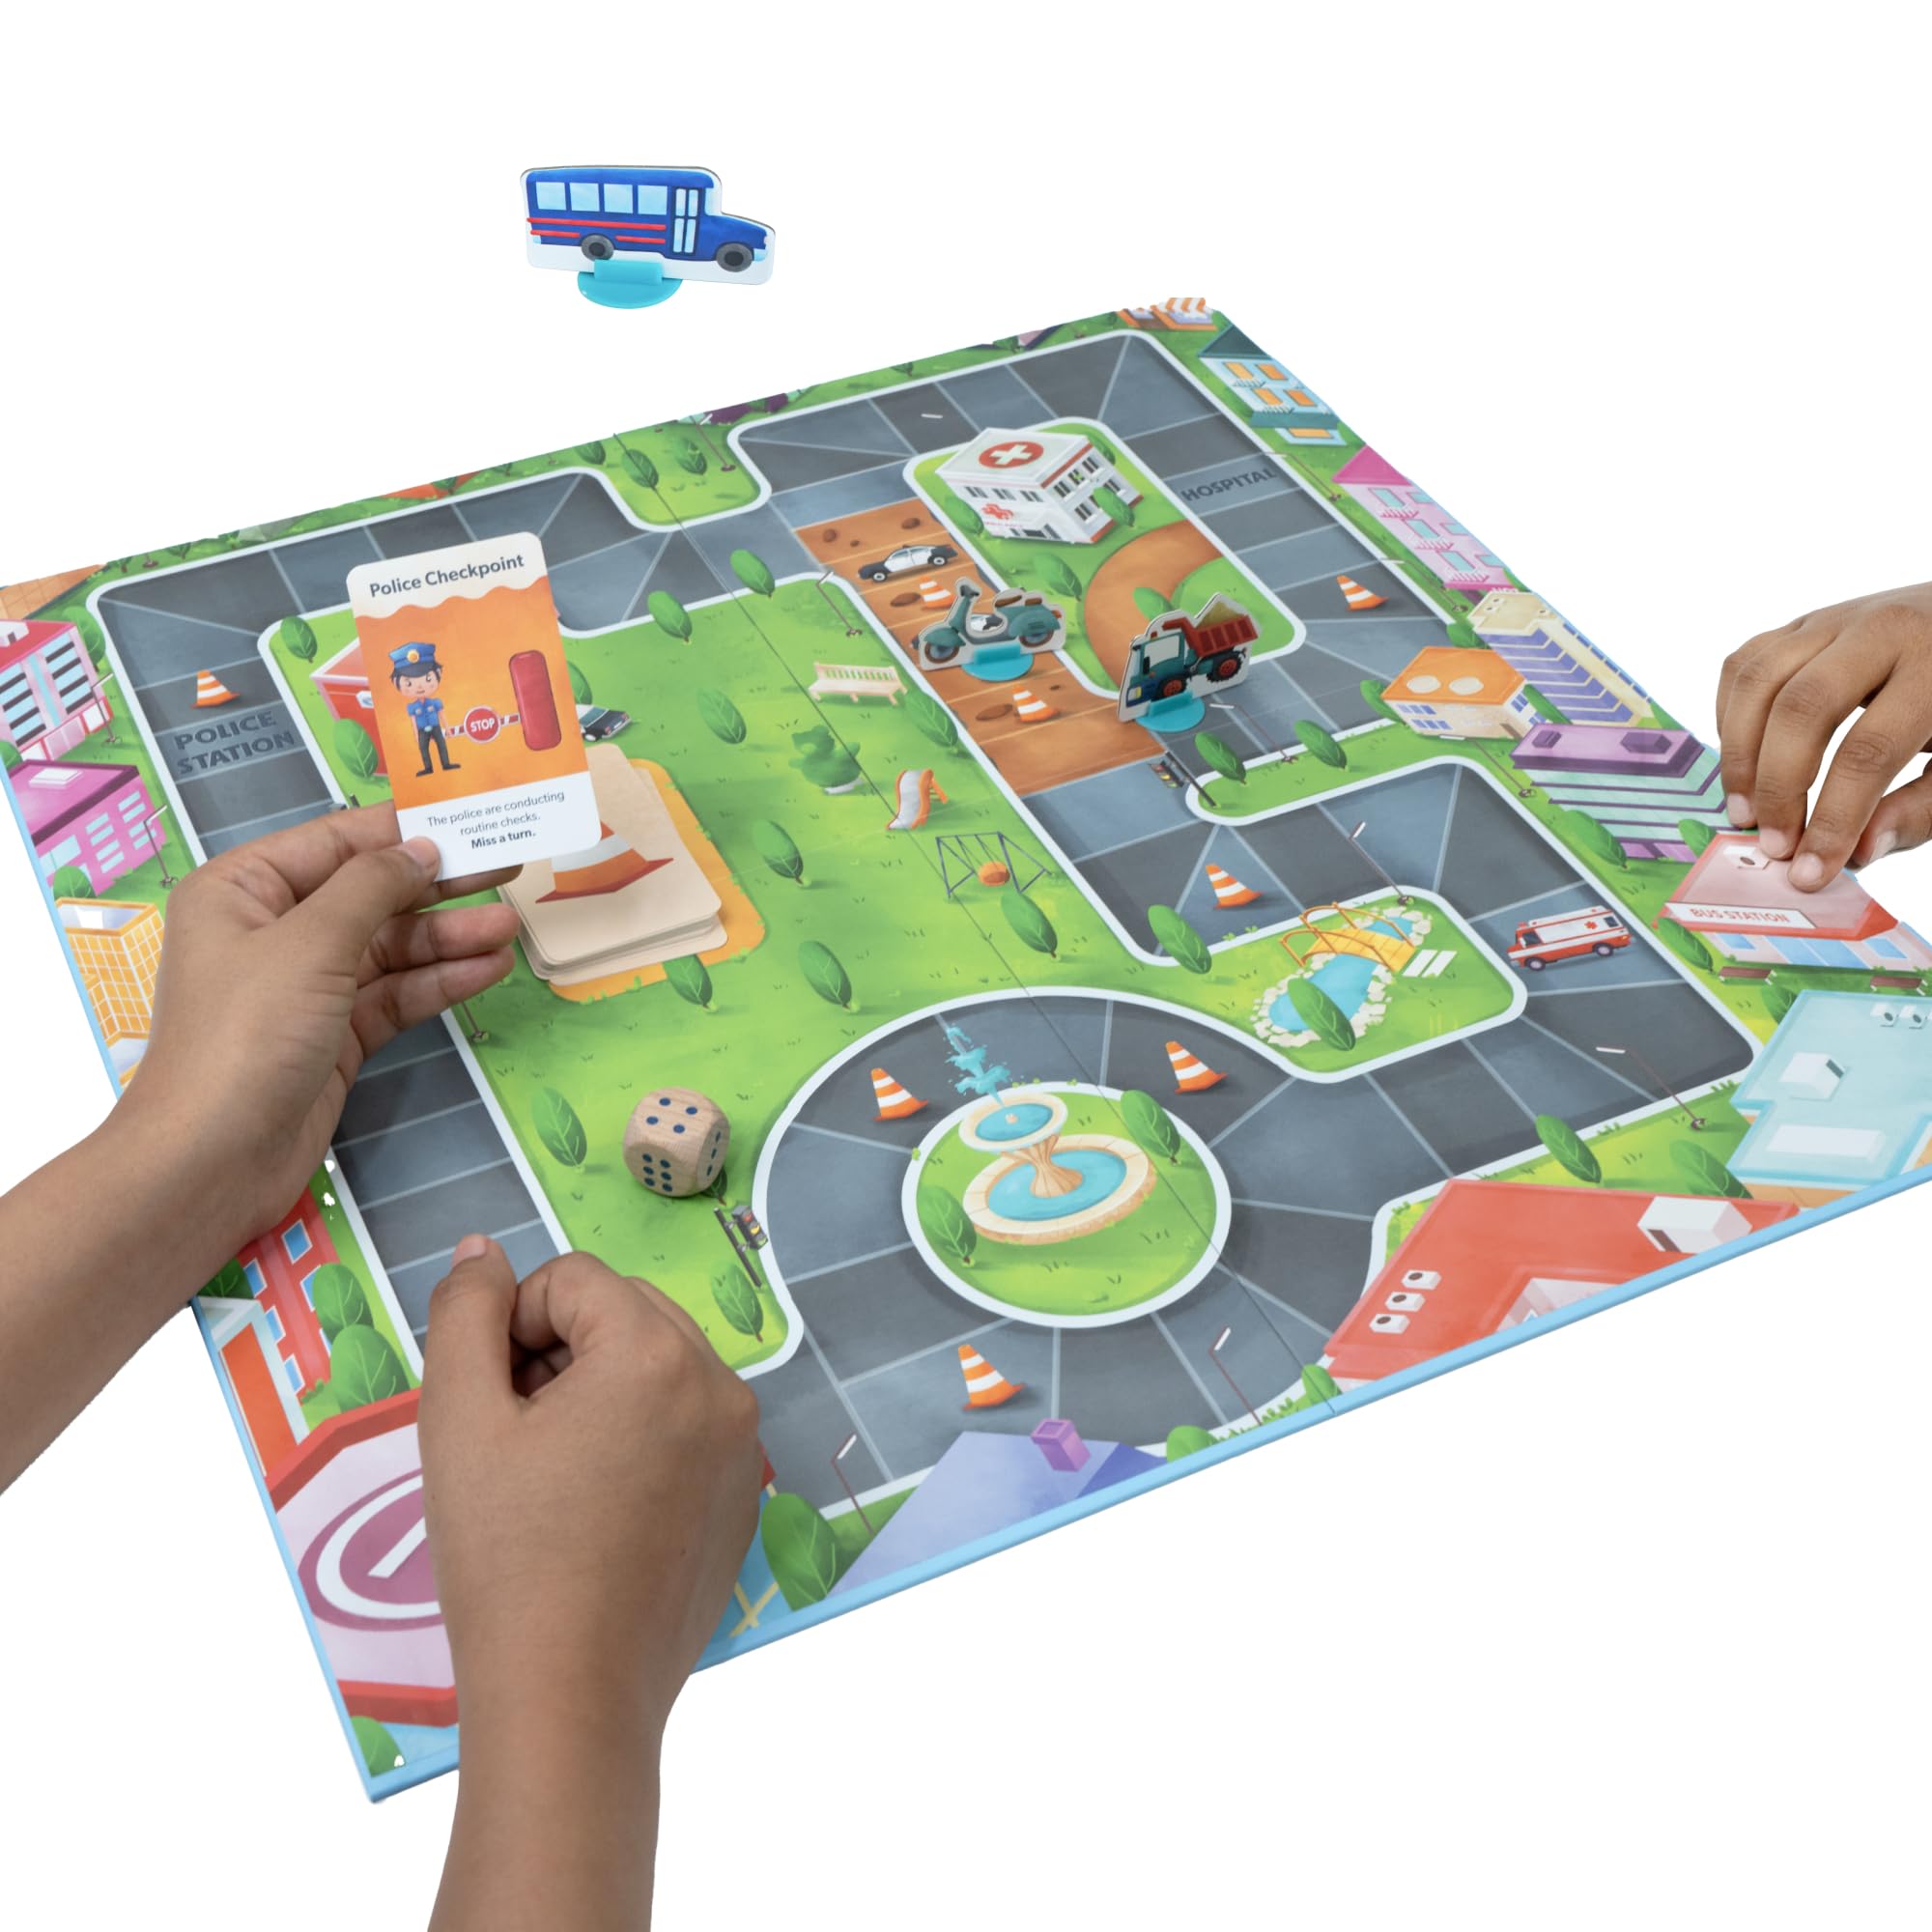 Strategic Board Games & Puzzles for Kids | Chaos Commute - LoveDabble | Board Games for Kids & Adults | Board Games for Family Night| 2+Players | Gifts for Boys and Girls | for Ages 6+ Years